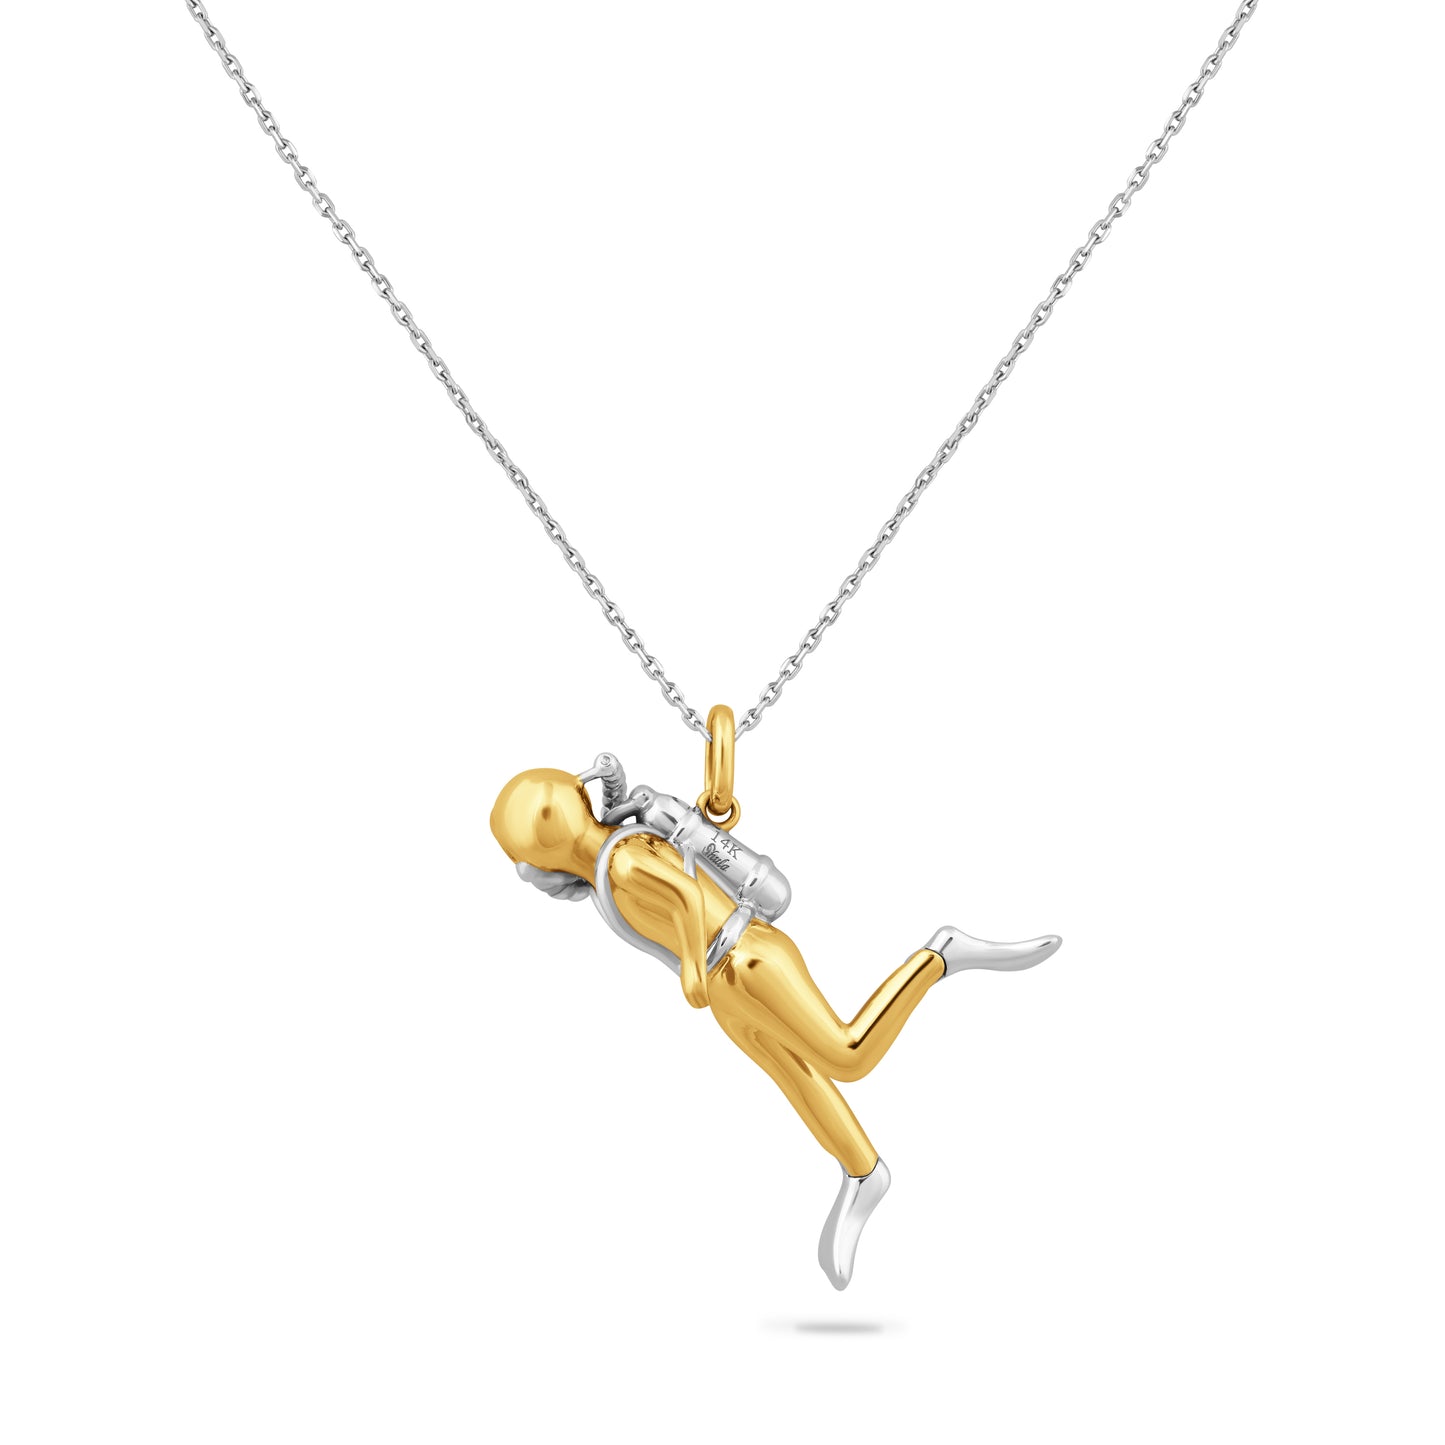 14K TT SCUBA DIVER PENDANT WITH 11 DIAMONDS 0.036CT ON 18 INCHES CABLE CHAIN